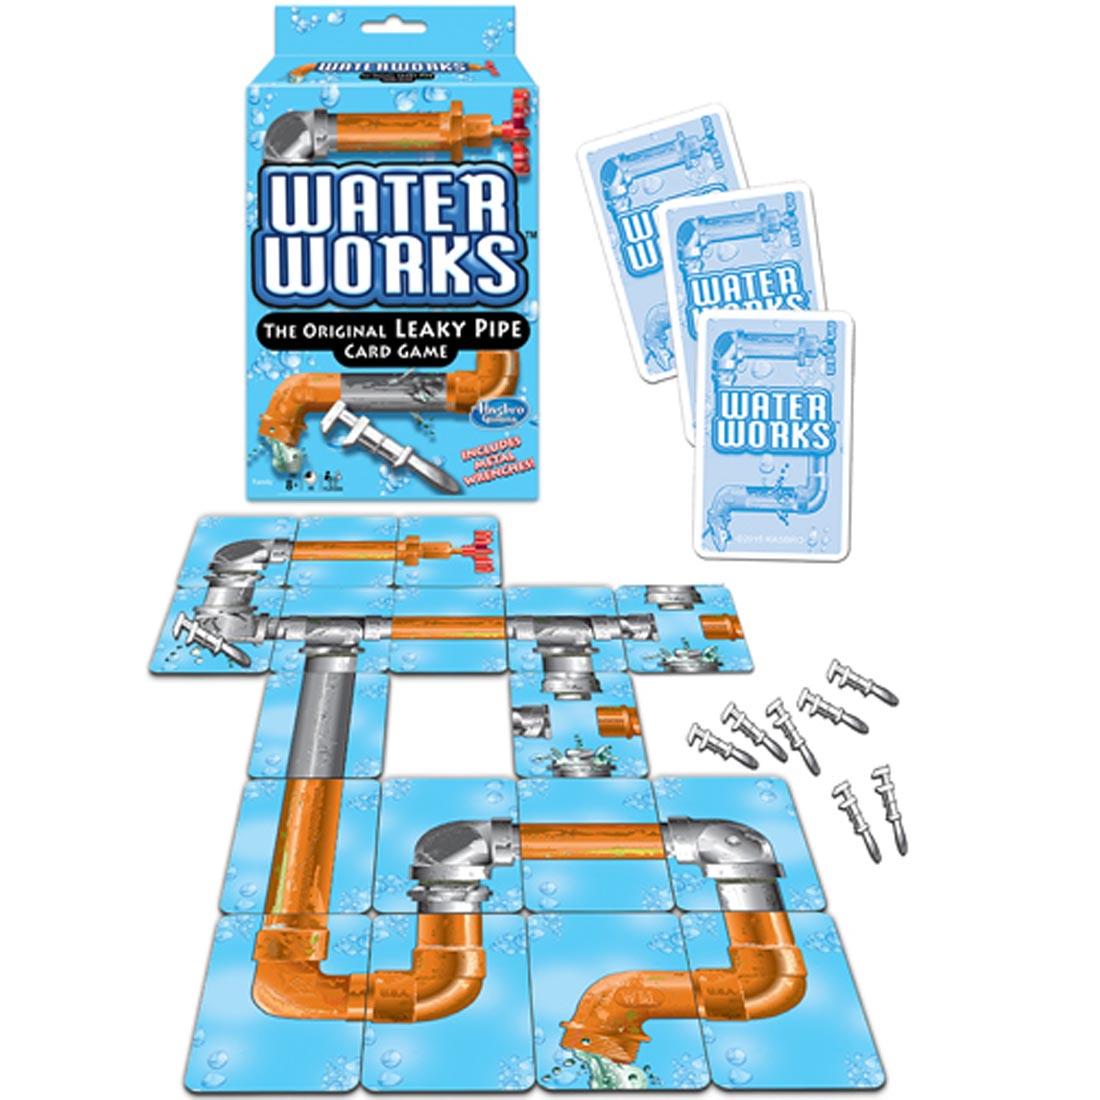 Water Works: The Original Leaky Pipe Card Game, showing box and game cards